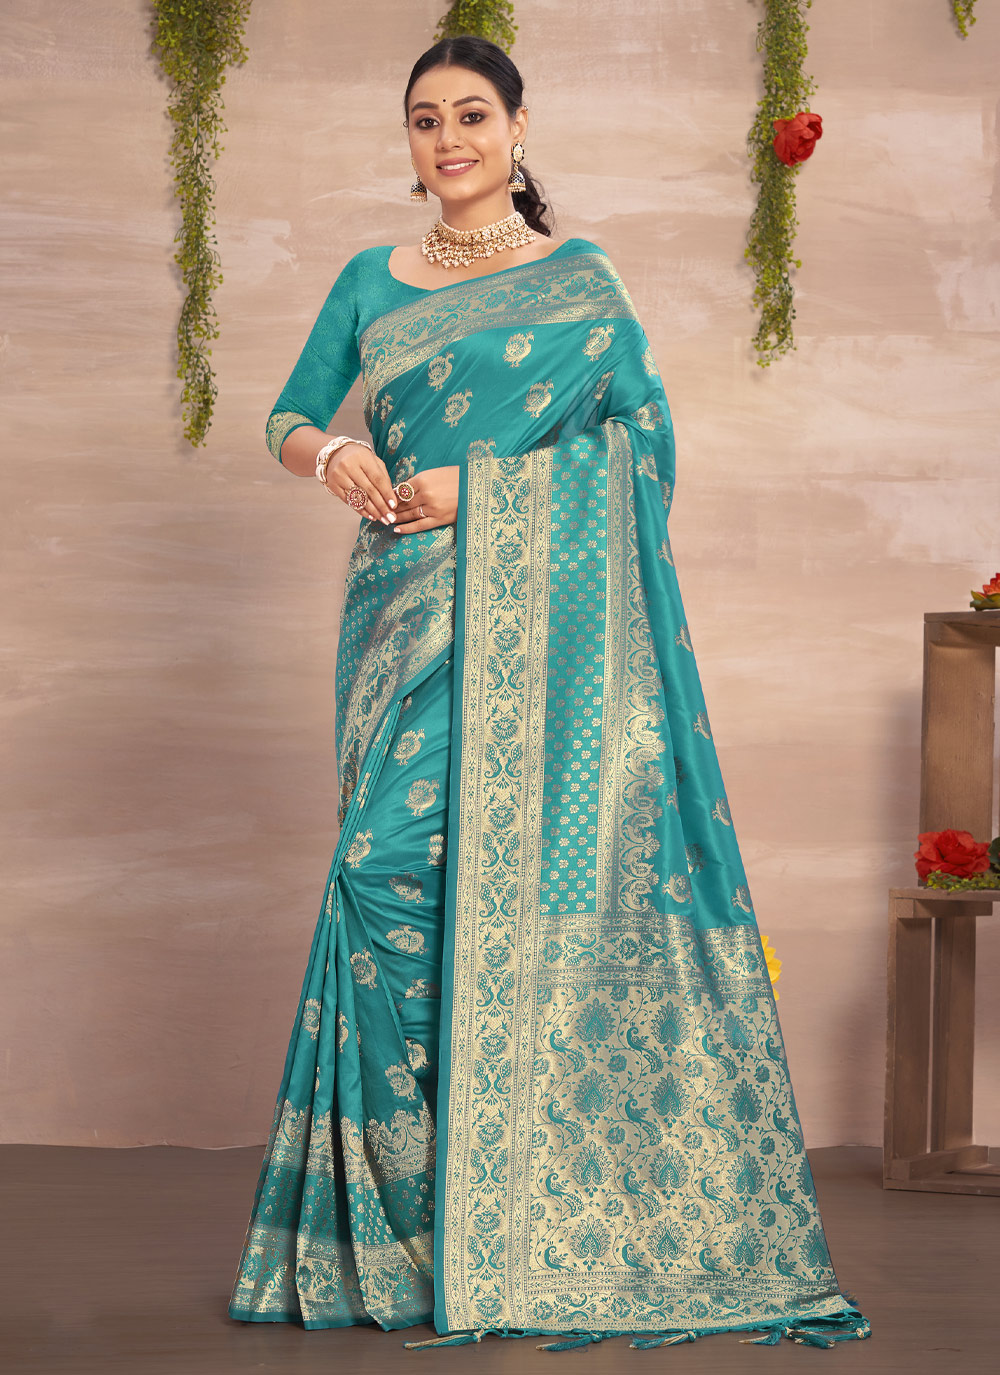 Sangam Jubilee collection 4